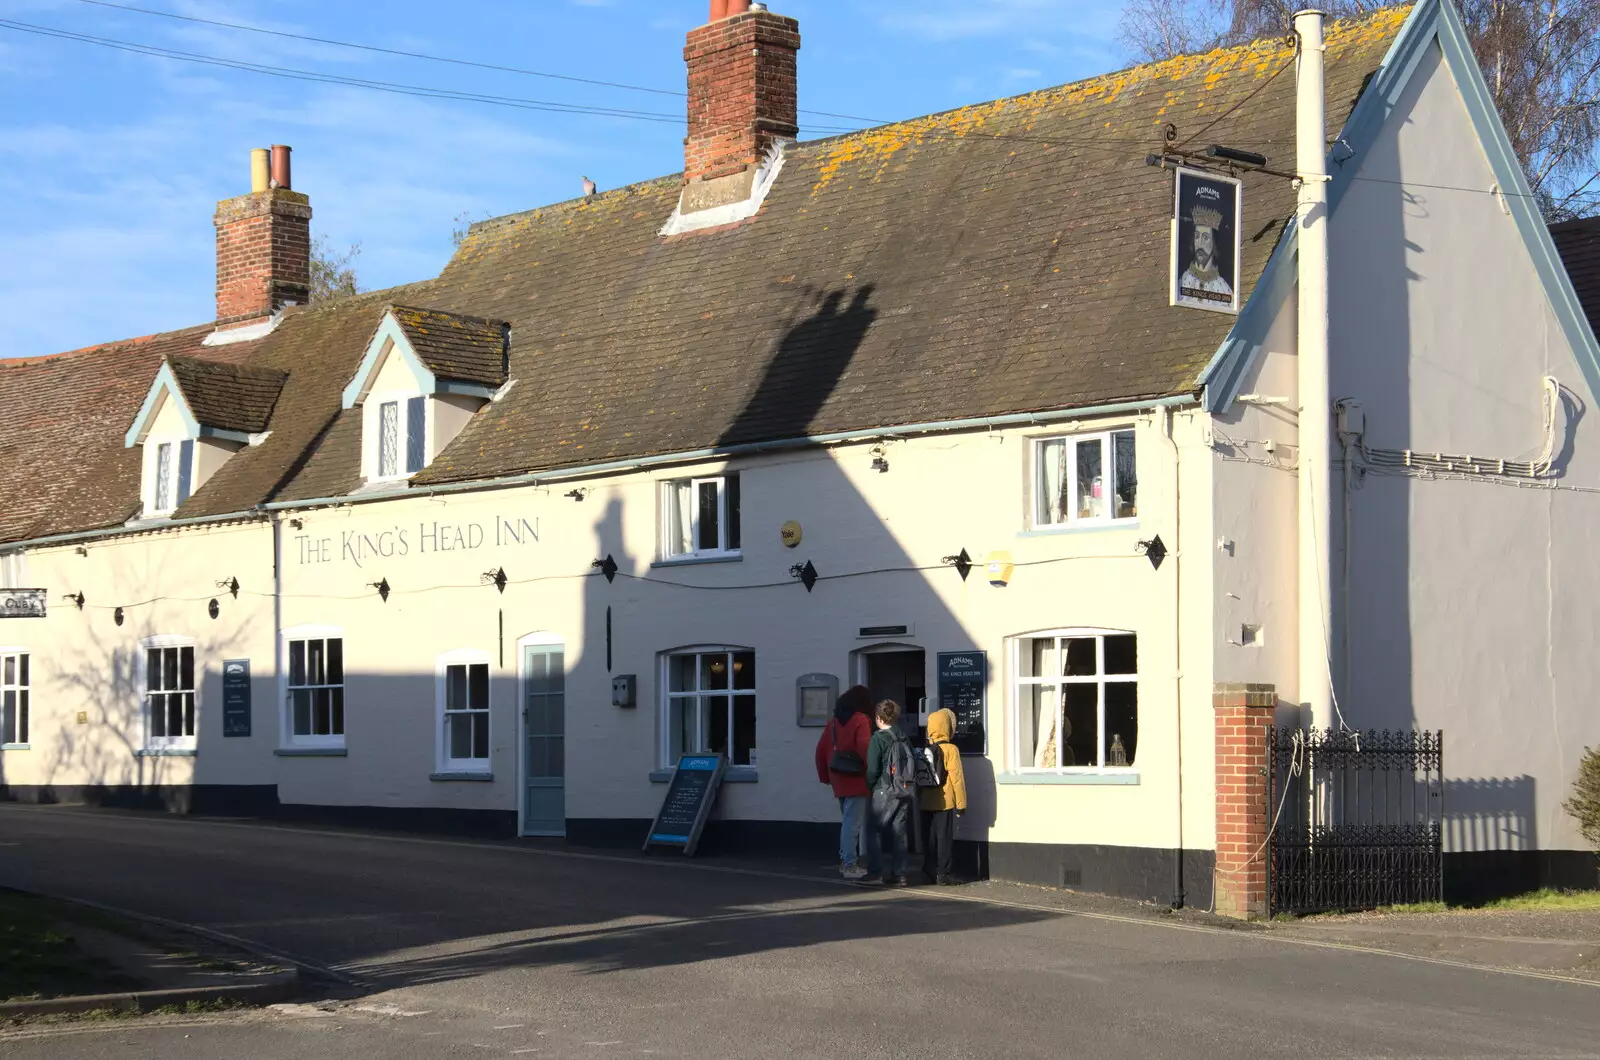 We visit the King's Head for a drink, from A Trip to Orford Castle, Orford, Suffolk - 26th February 2022